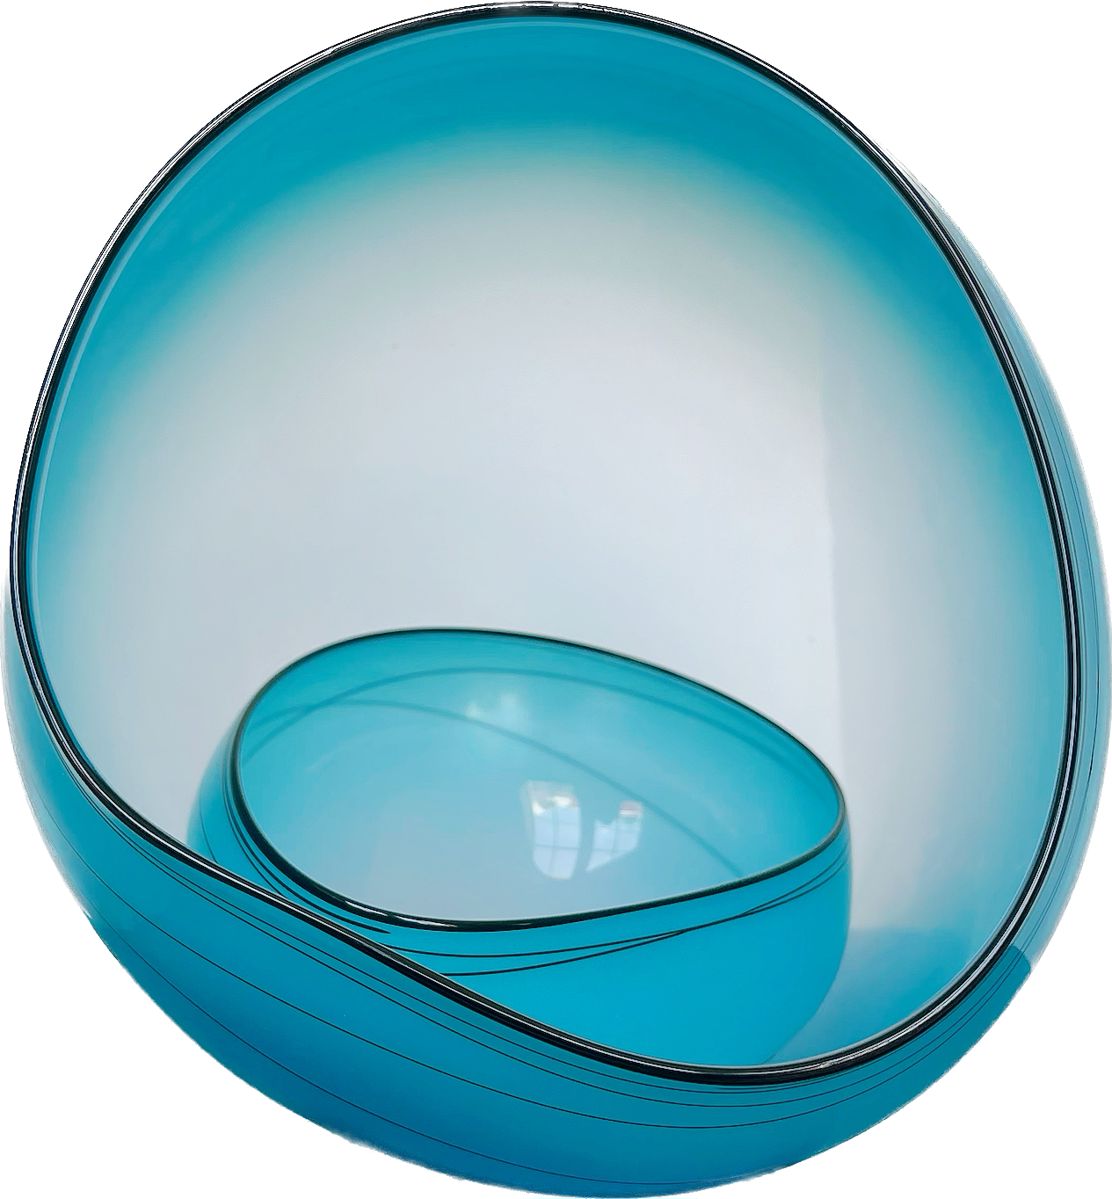 Chihuly Blue Sky Basket Set
Overall Basket: 10long x 8"wide x 8.5tall
Opening: 6x6.5"
Smaller interior basket: 6" x 4"
Vitrine: 12.5" x 12.5" x 14"tall